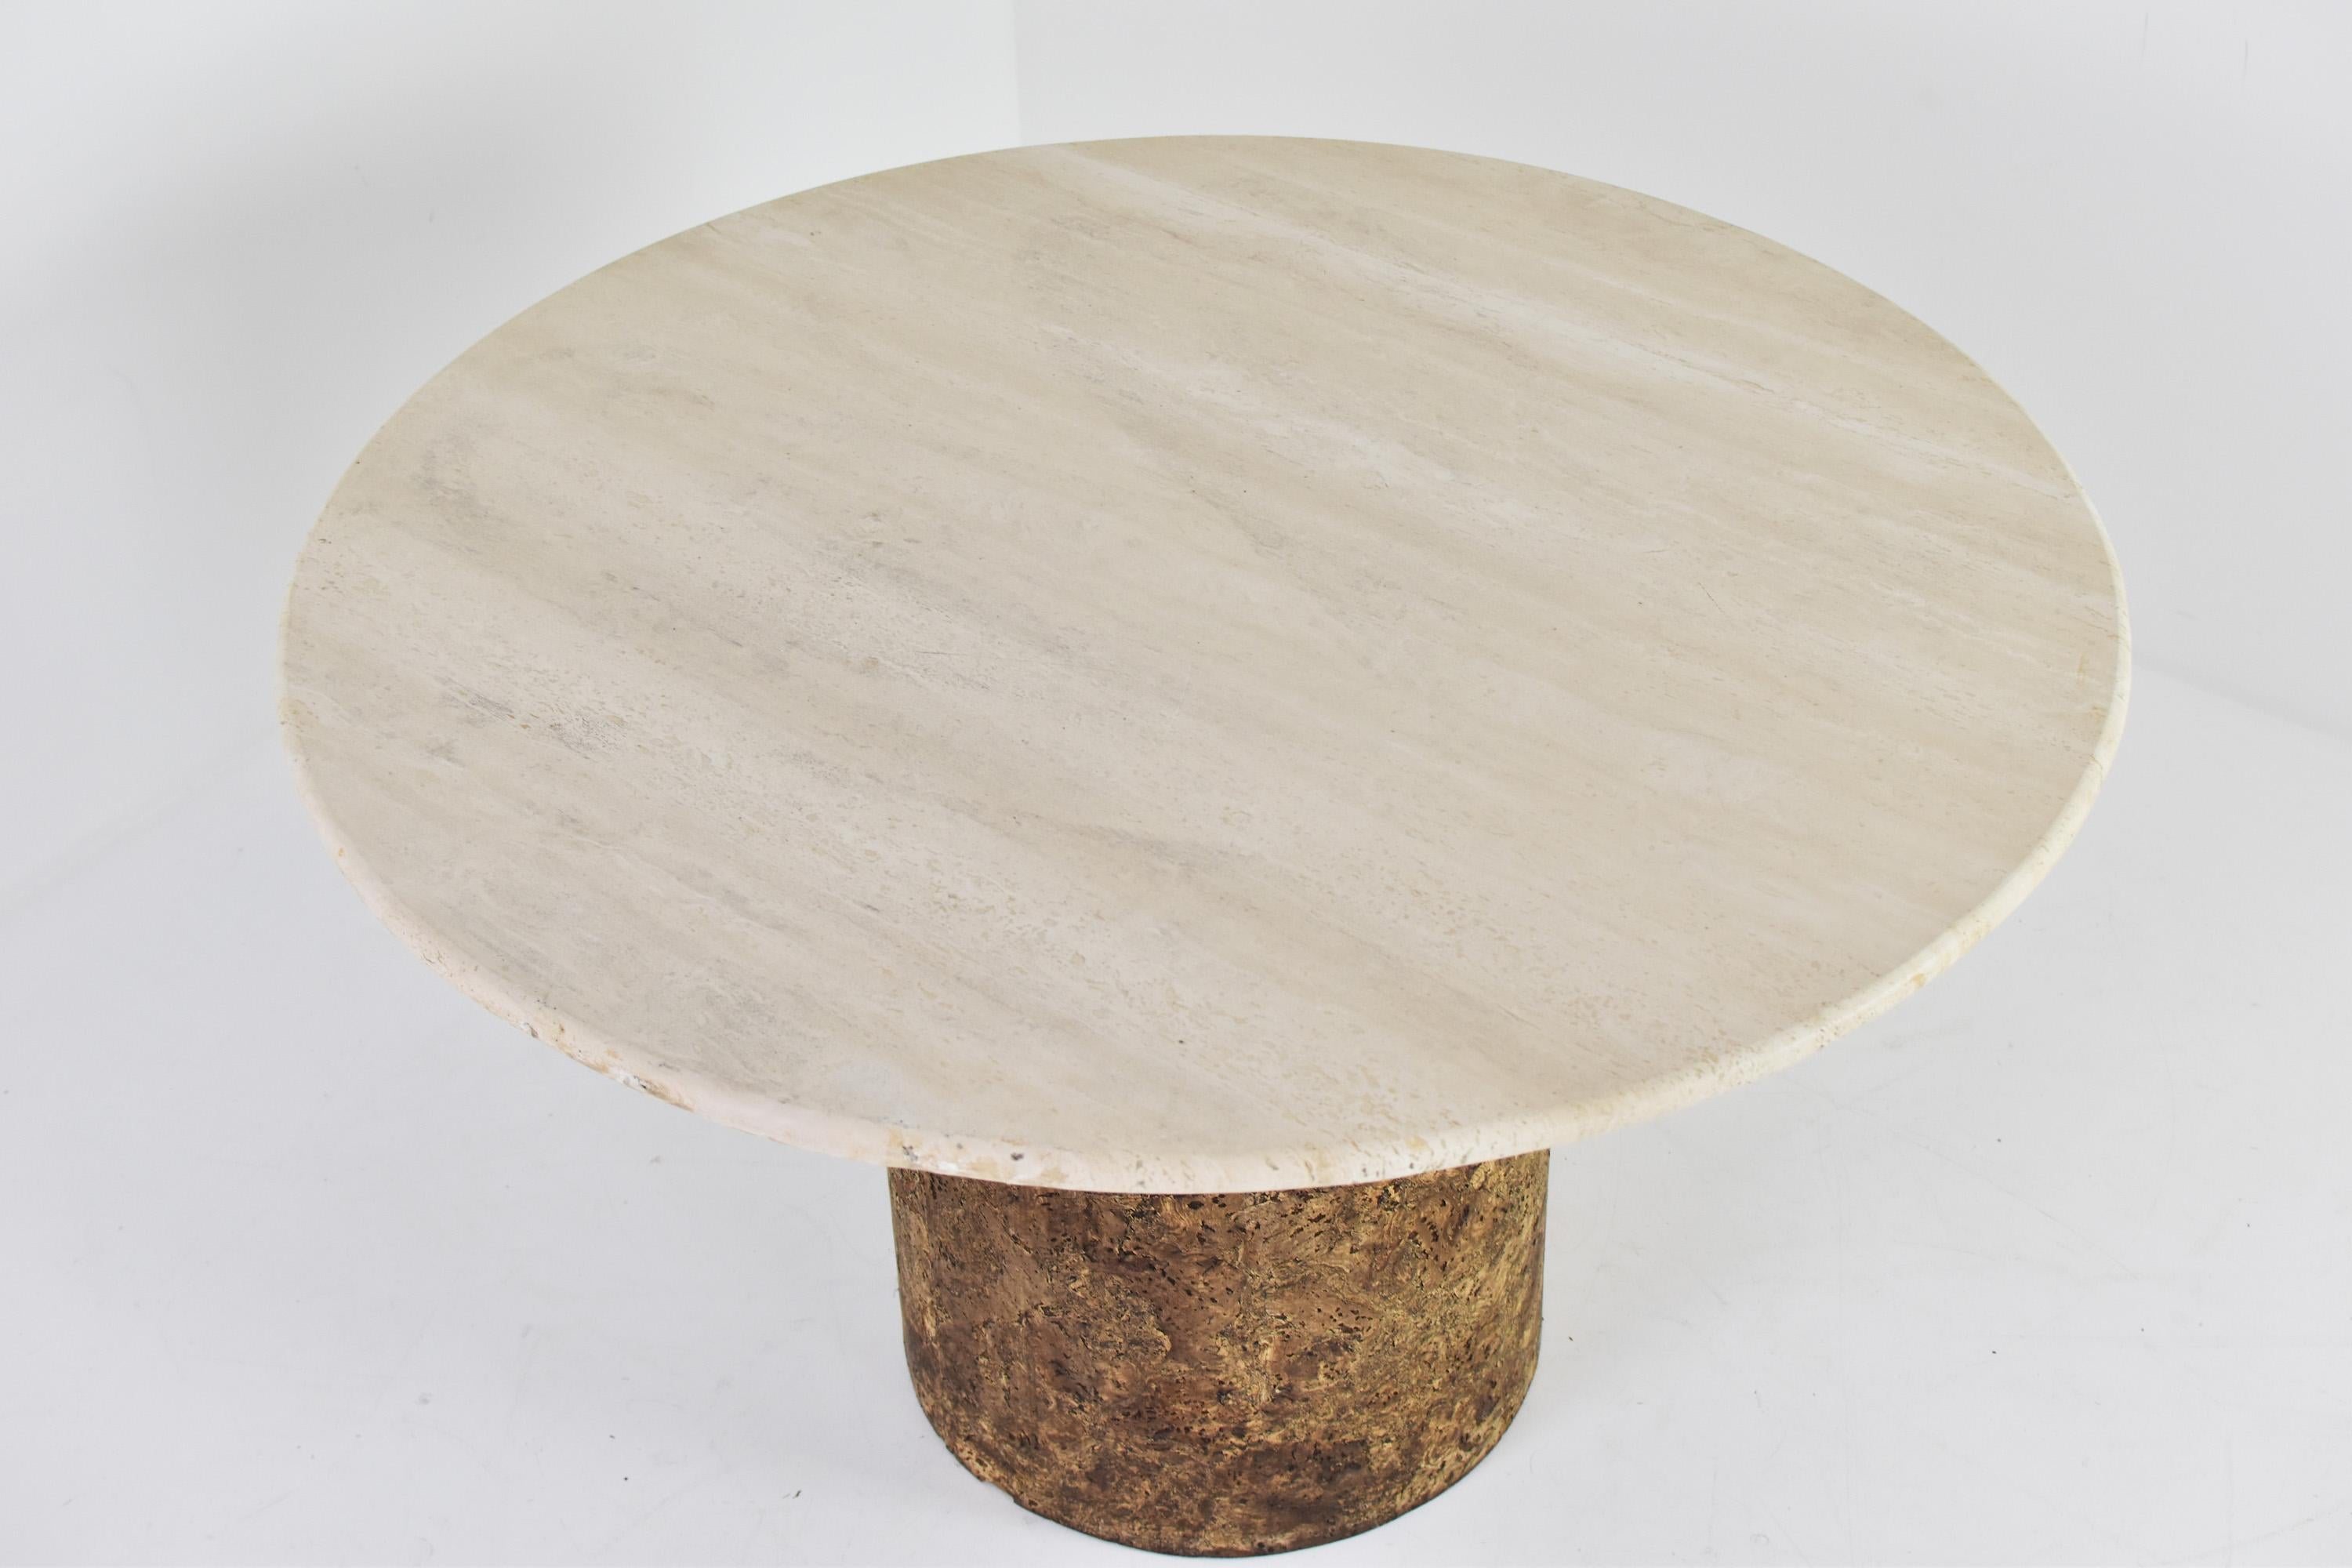 European Dining Table in Travertine and Cork from the 1960’s